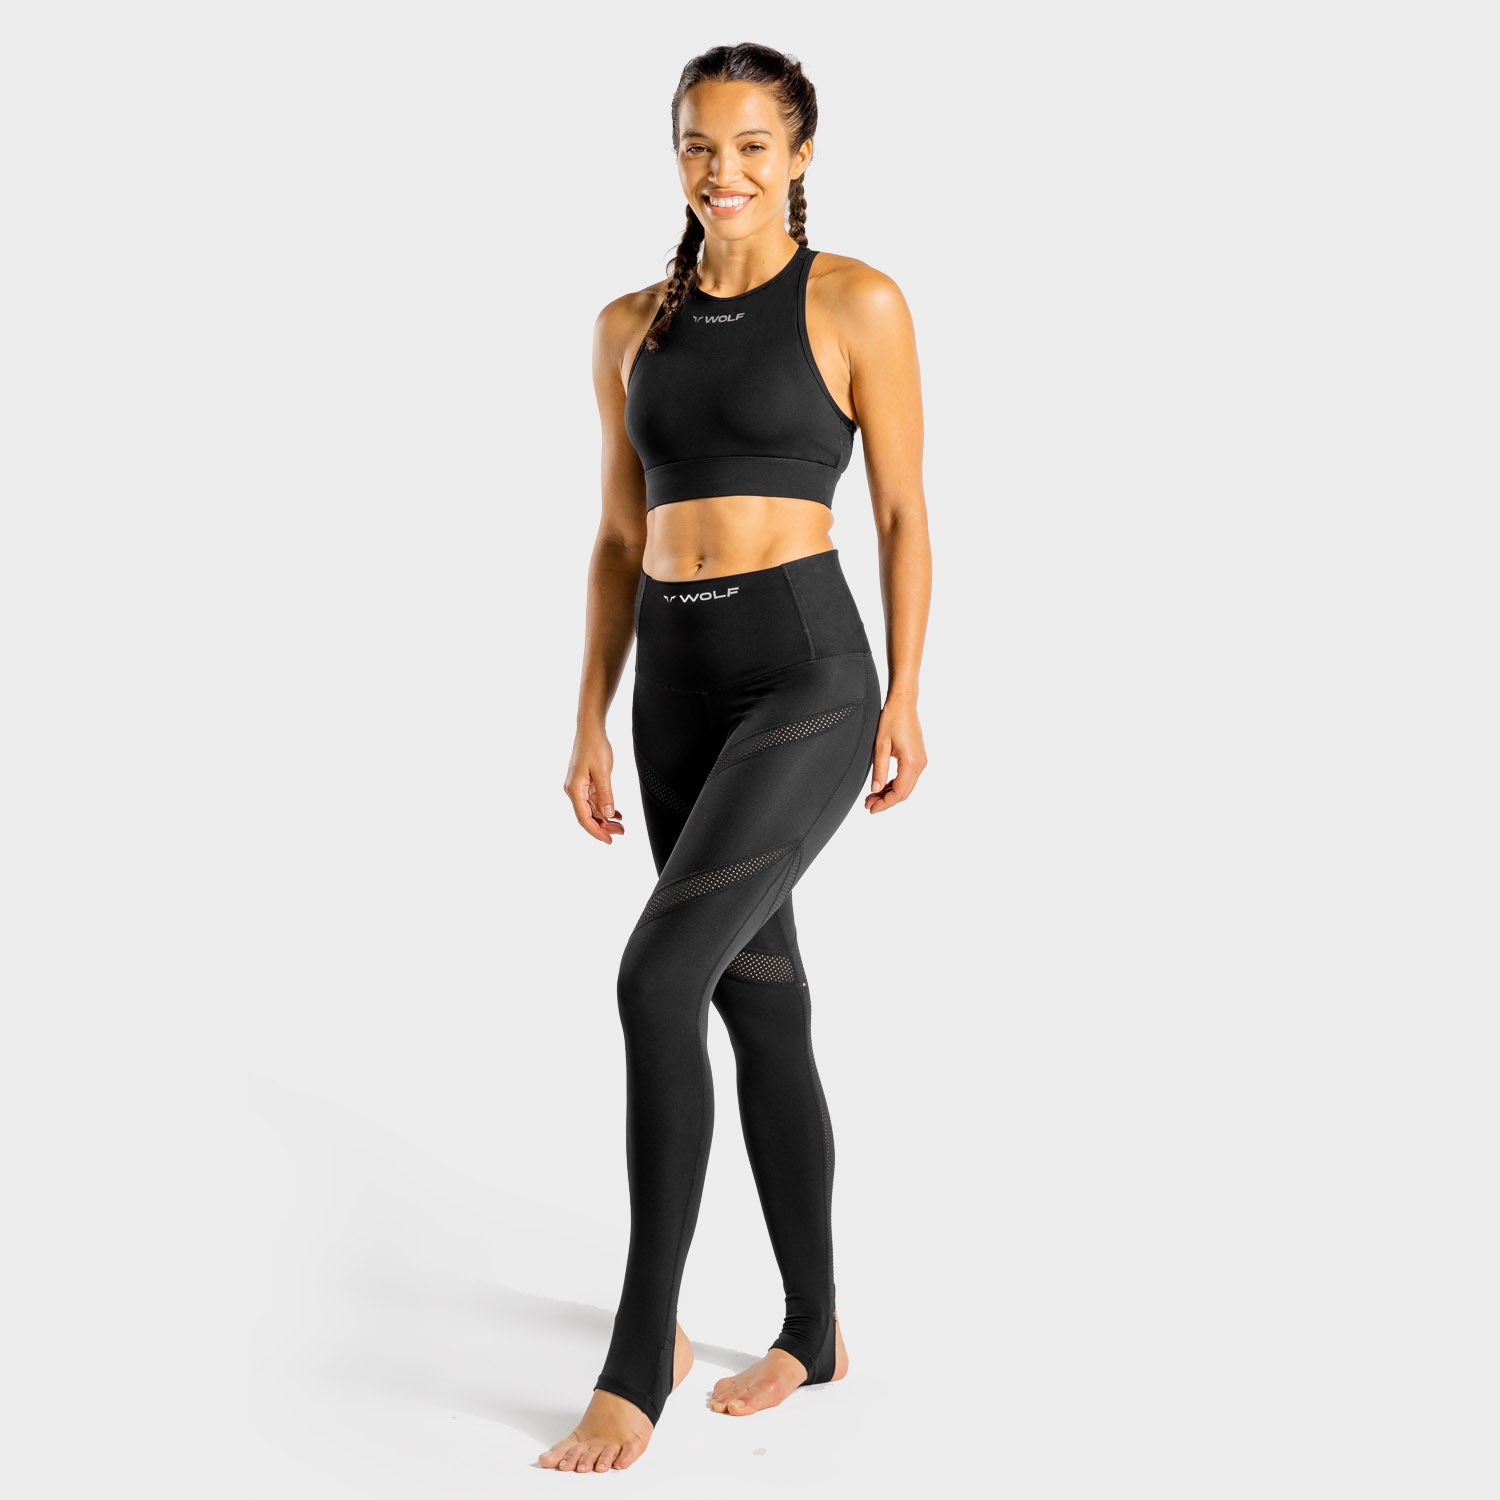 squatwolf-gym-leggings-for-women-wolf-leggings-black-workout-clothes